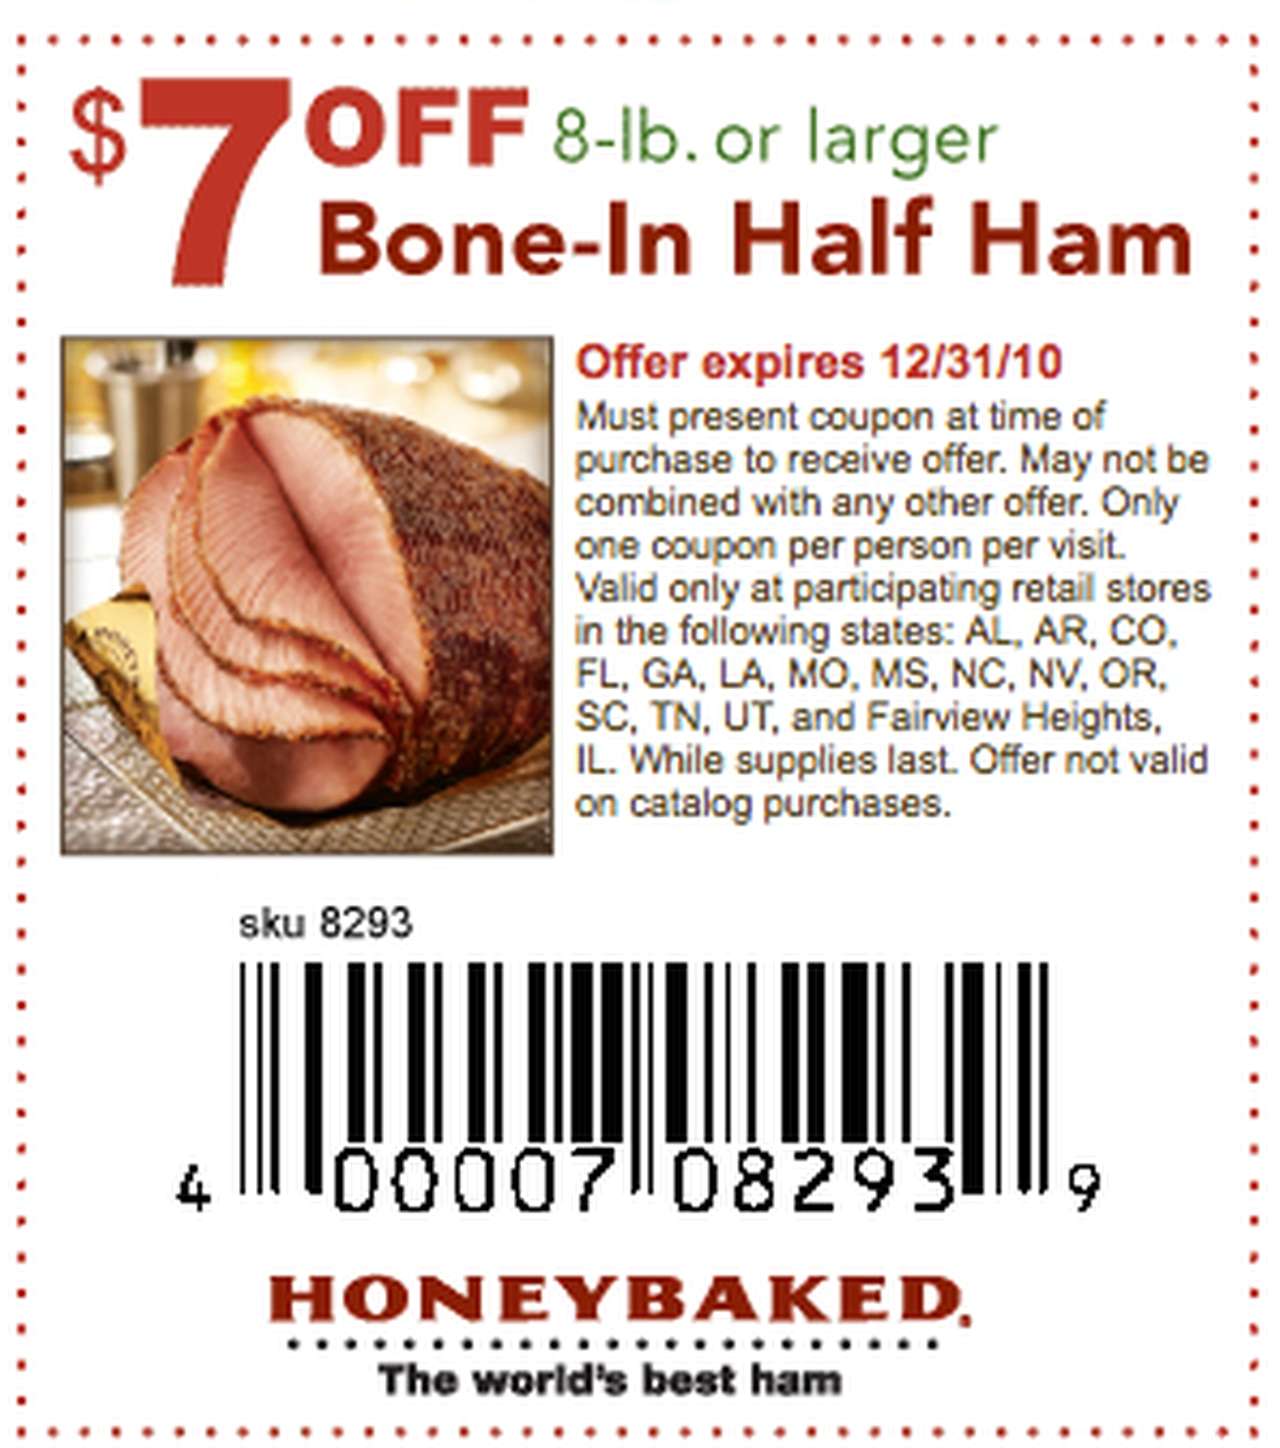 Honey Baked Ham Printable Coupons: $7 off 8 lb or larger + More